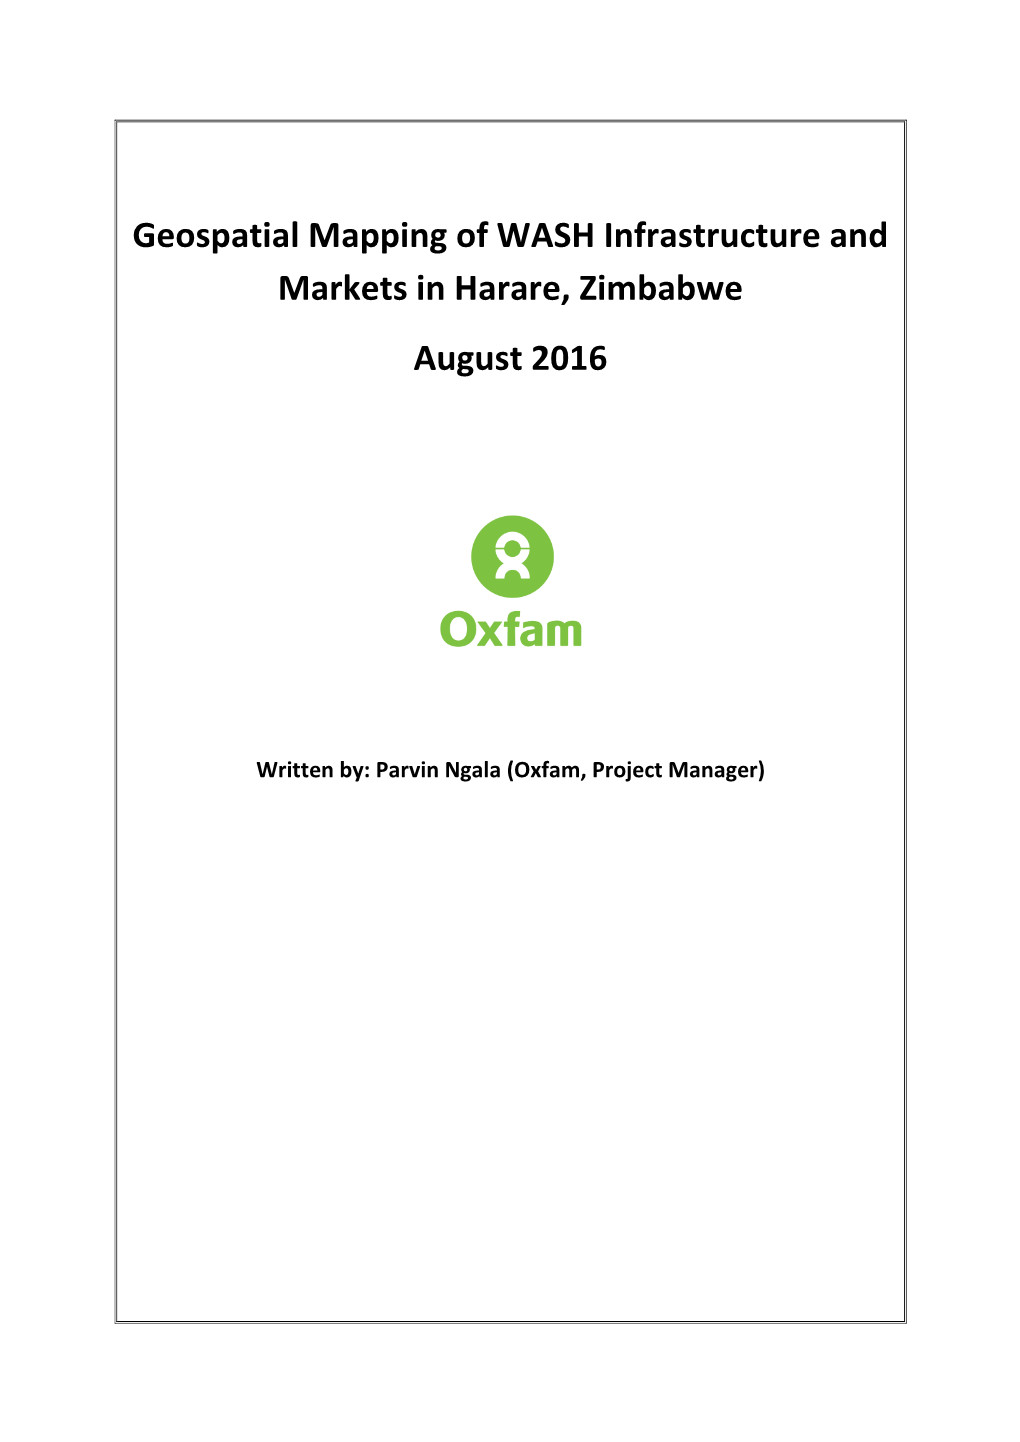 Geospatial Mapping of WASH Infrastructure and Markets in Harare, Zimbabwe August 2016